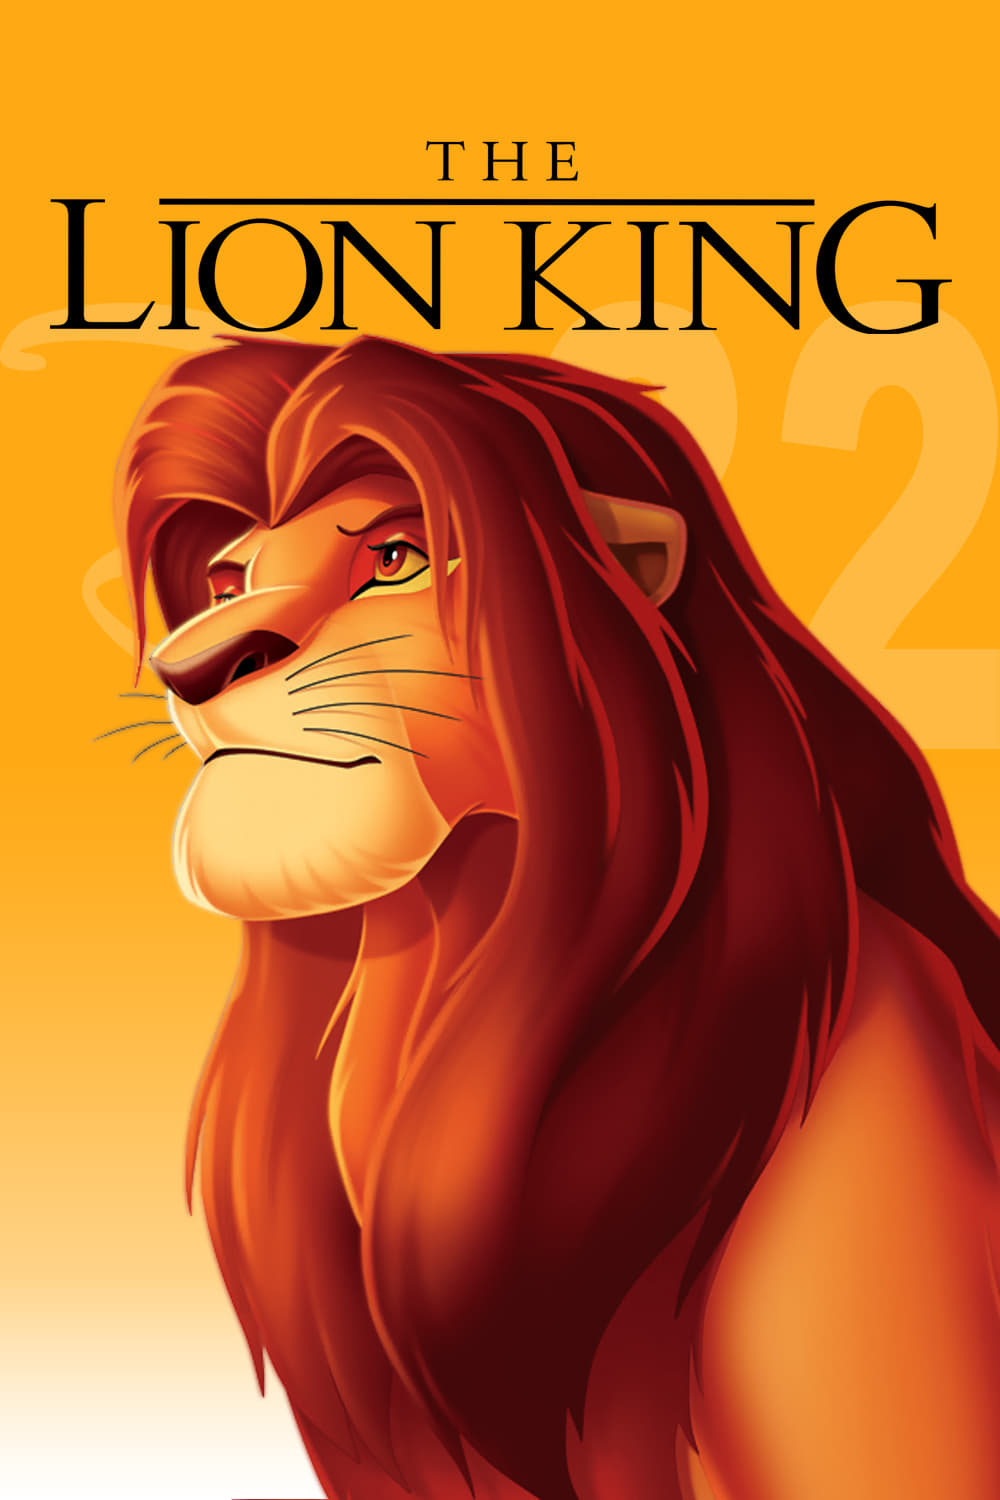 The Lion King Movie poster